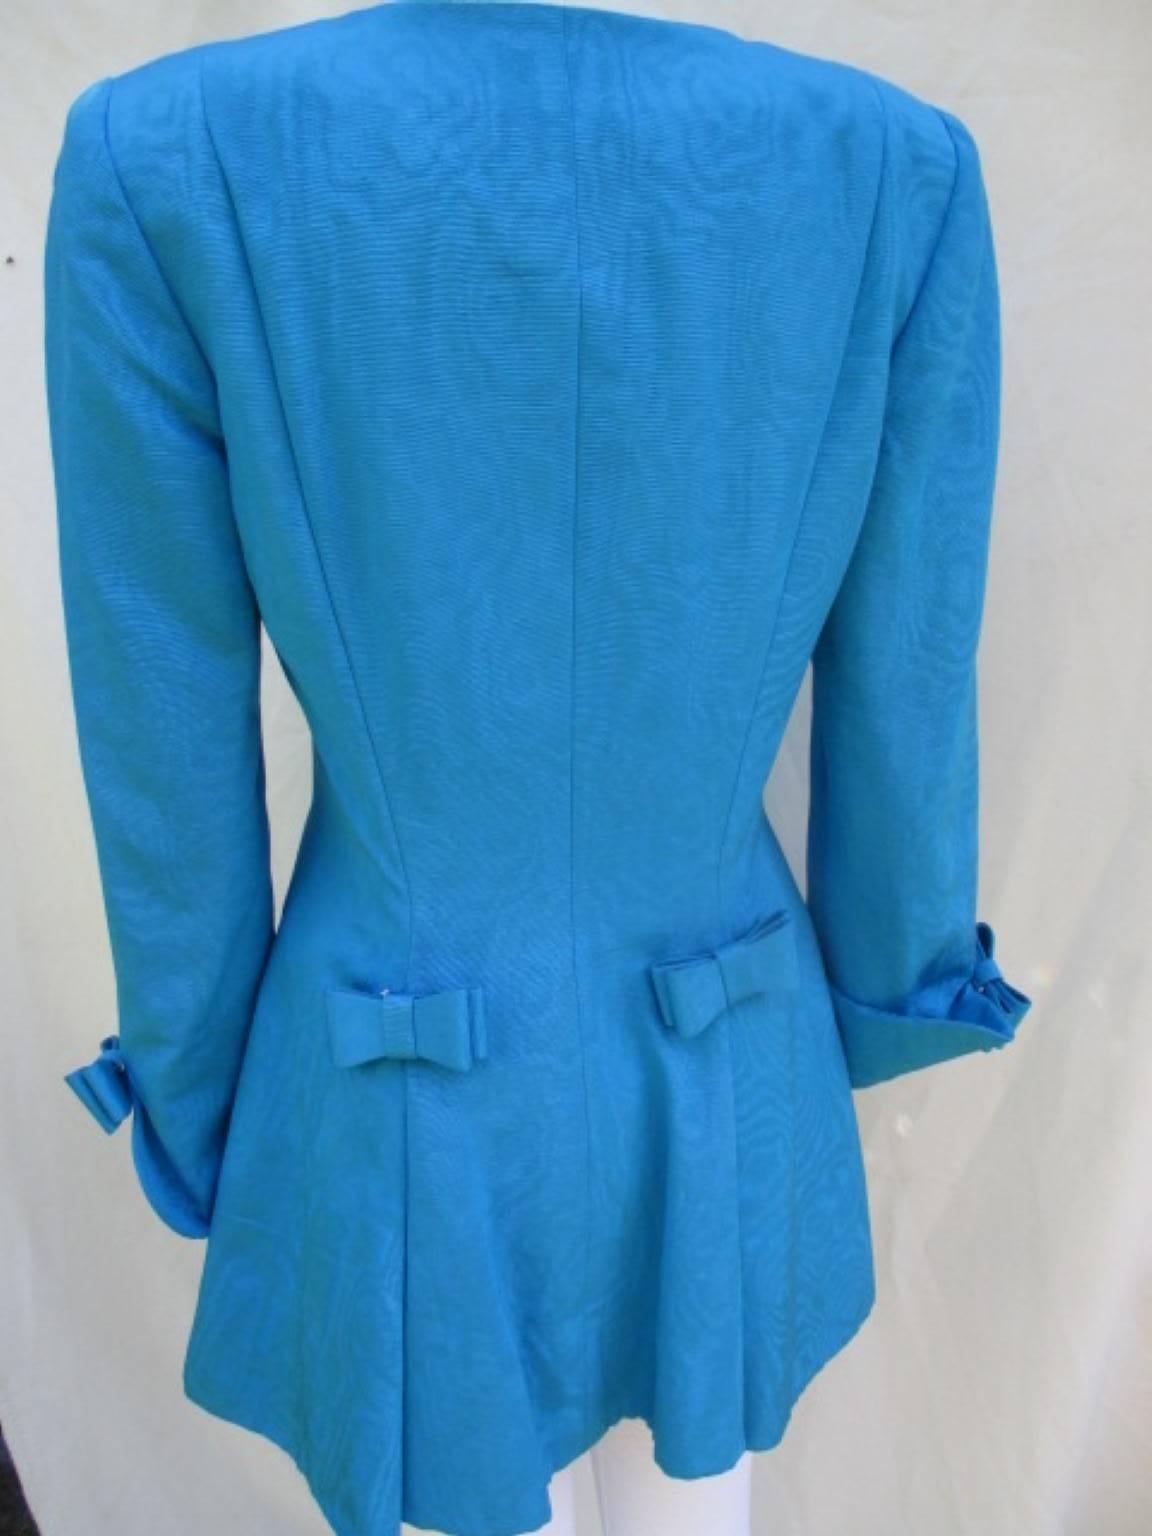 Women's or Men's Nina Ricci paris turquoise bows jacket with skirt  For Sale